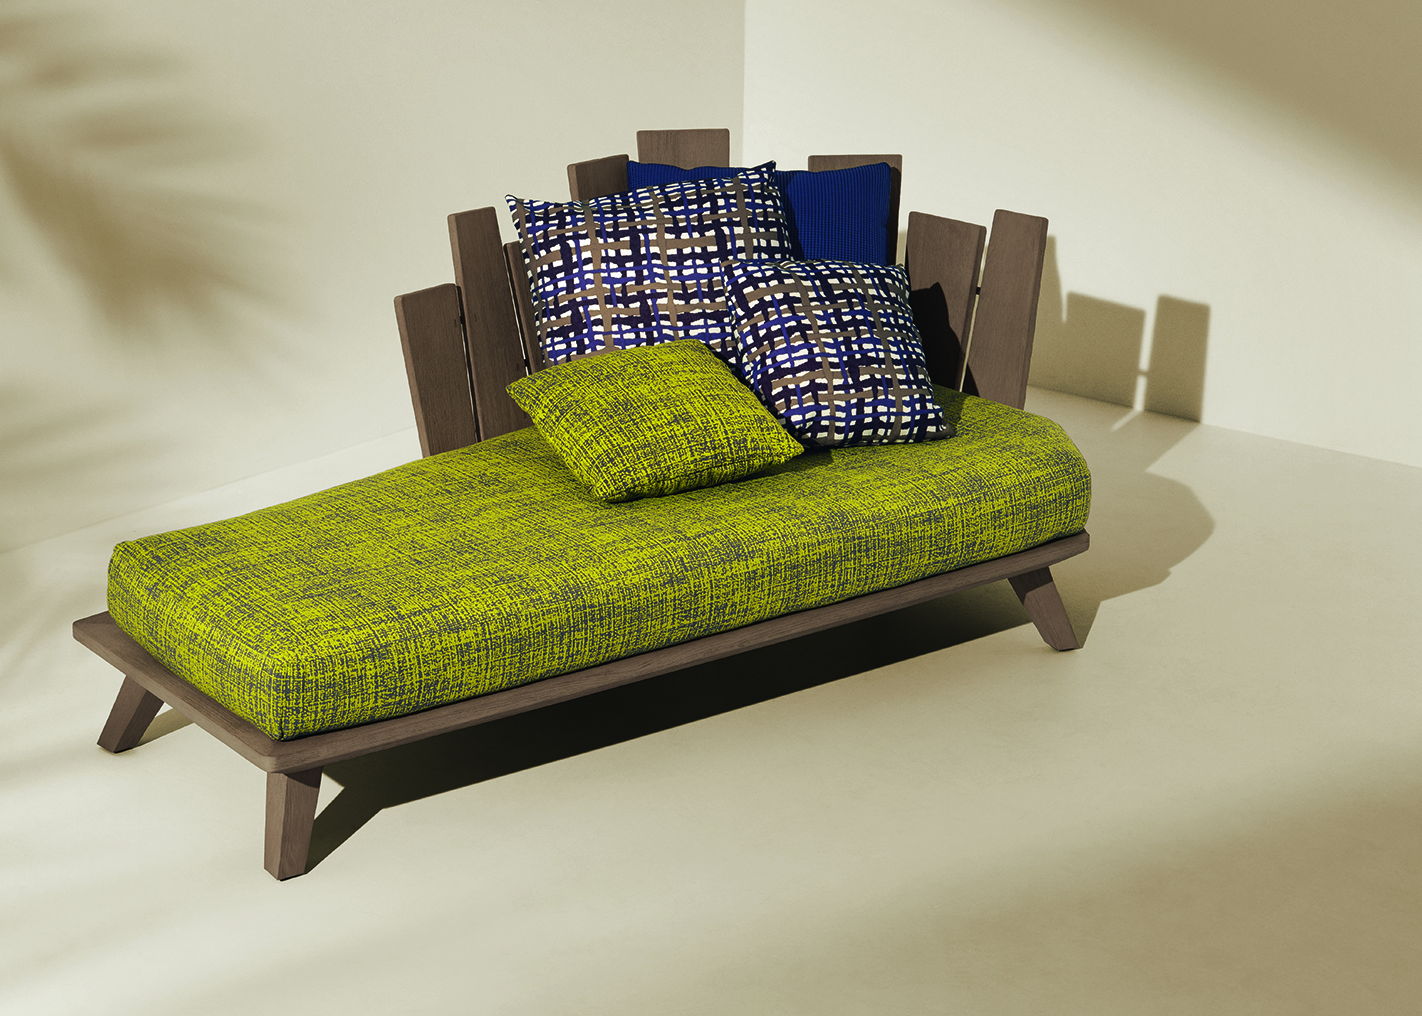 Rafael lounge bed by Paola Navone for Ethimo Design